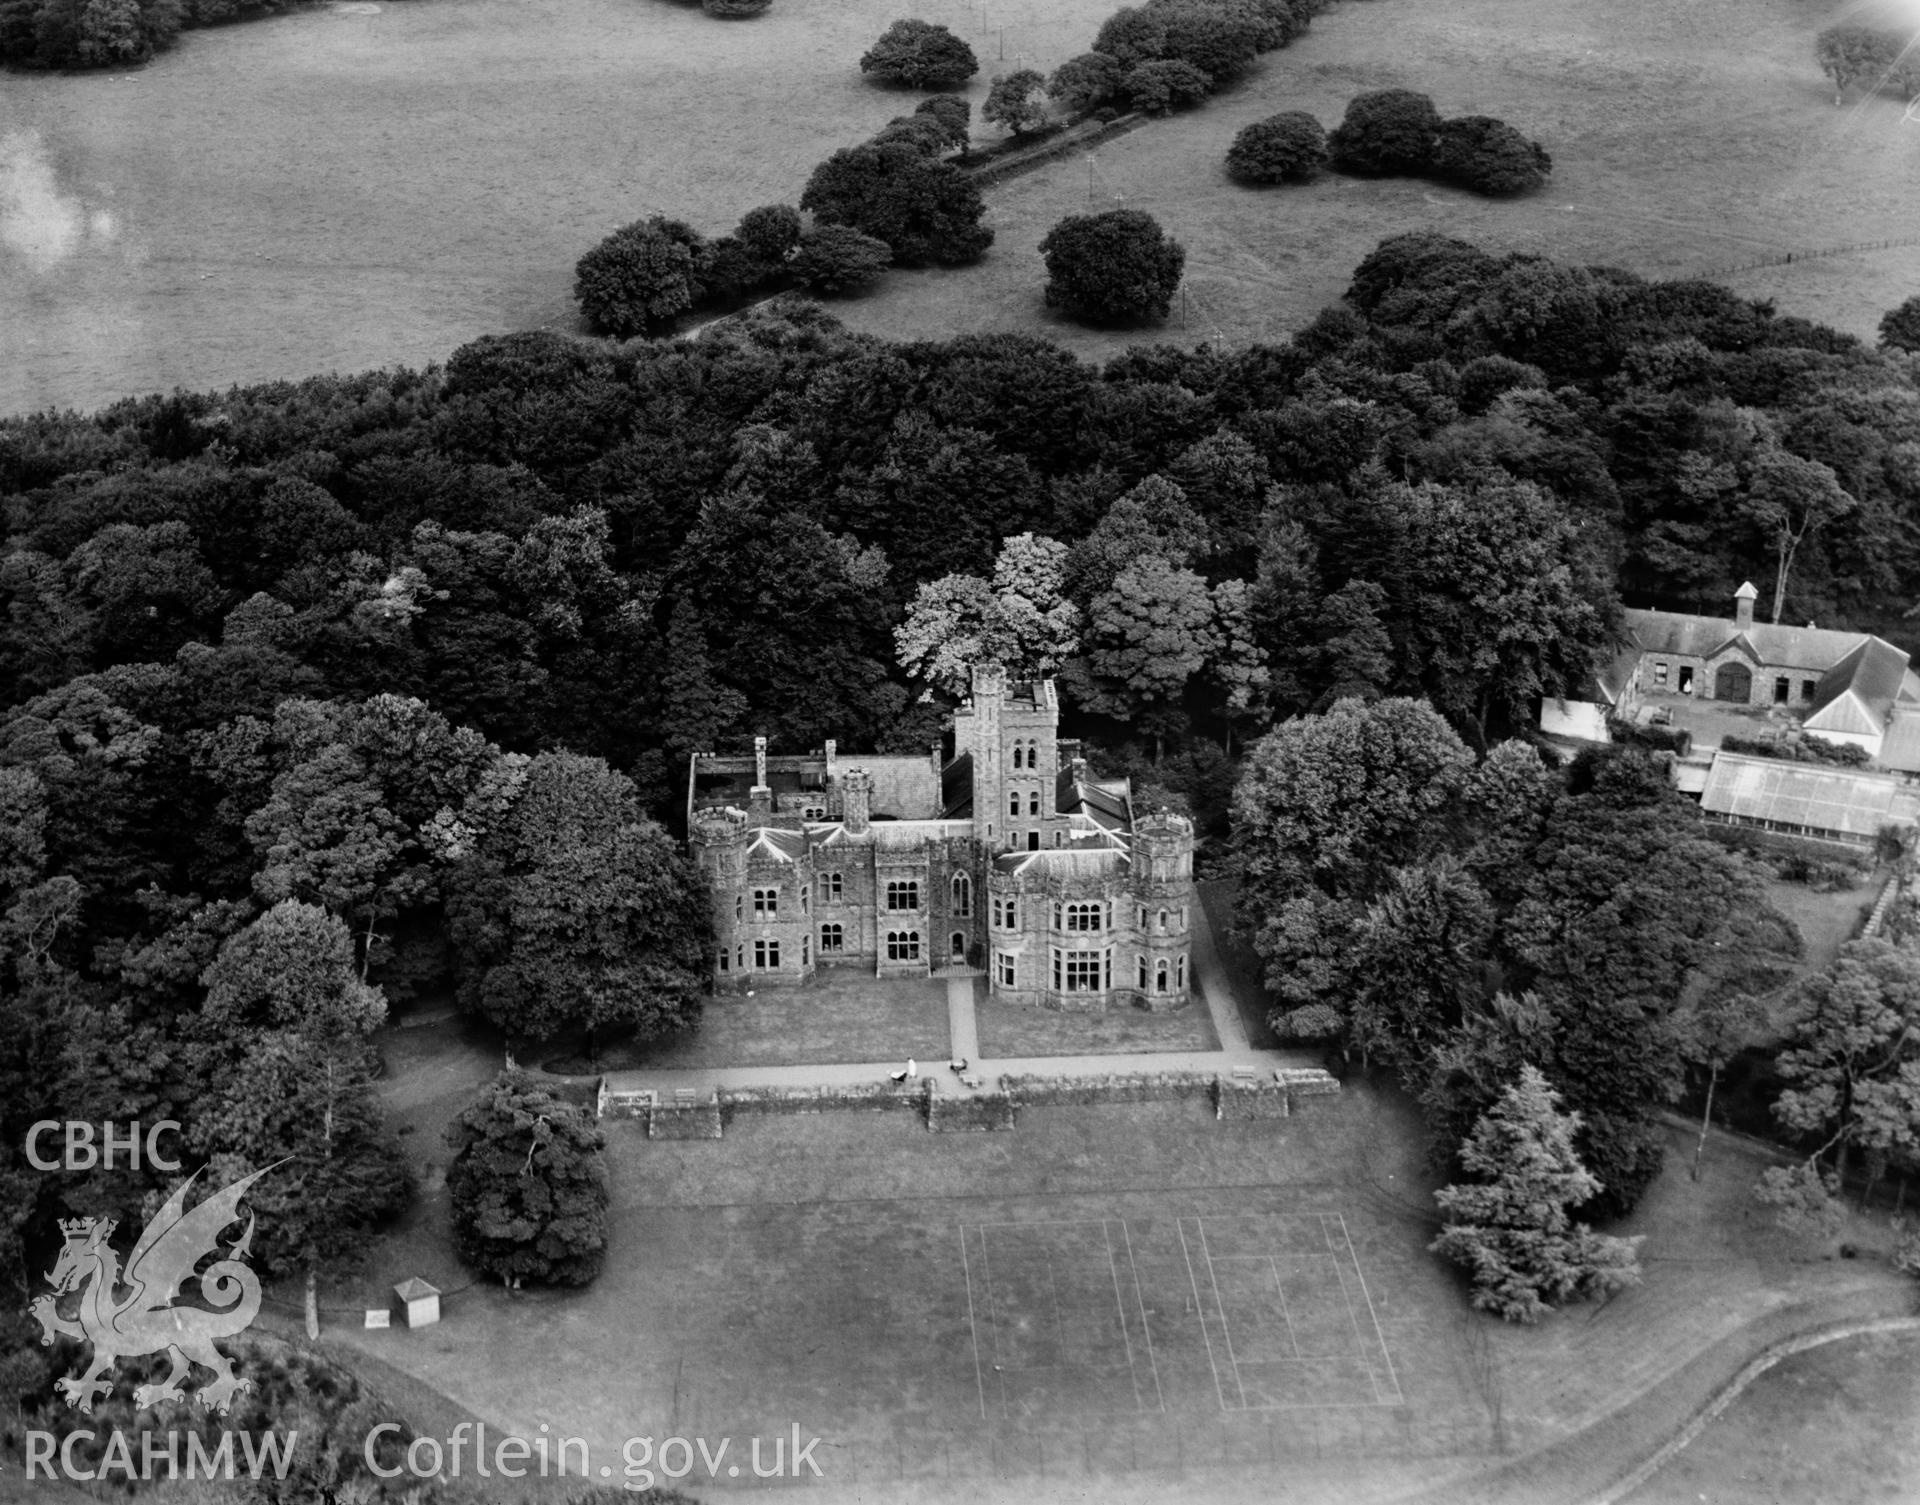 View of Hean Castle and grounds, Saundersfoot, oblique aerial view. 5?x4? black and white glass plate negative.